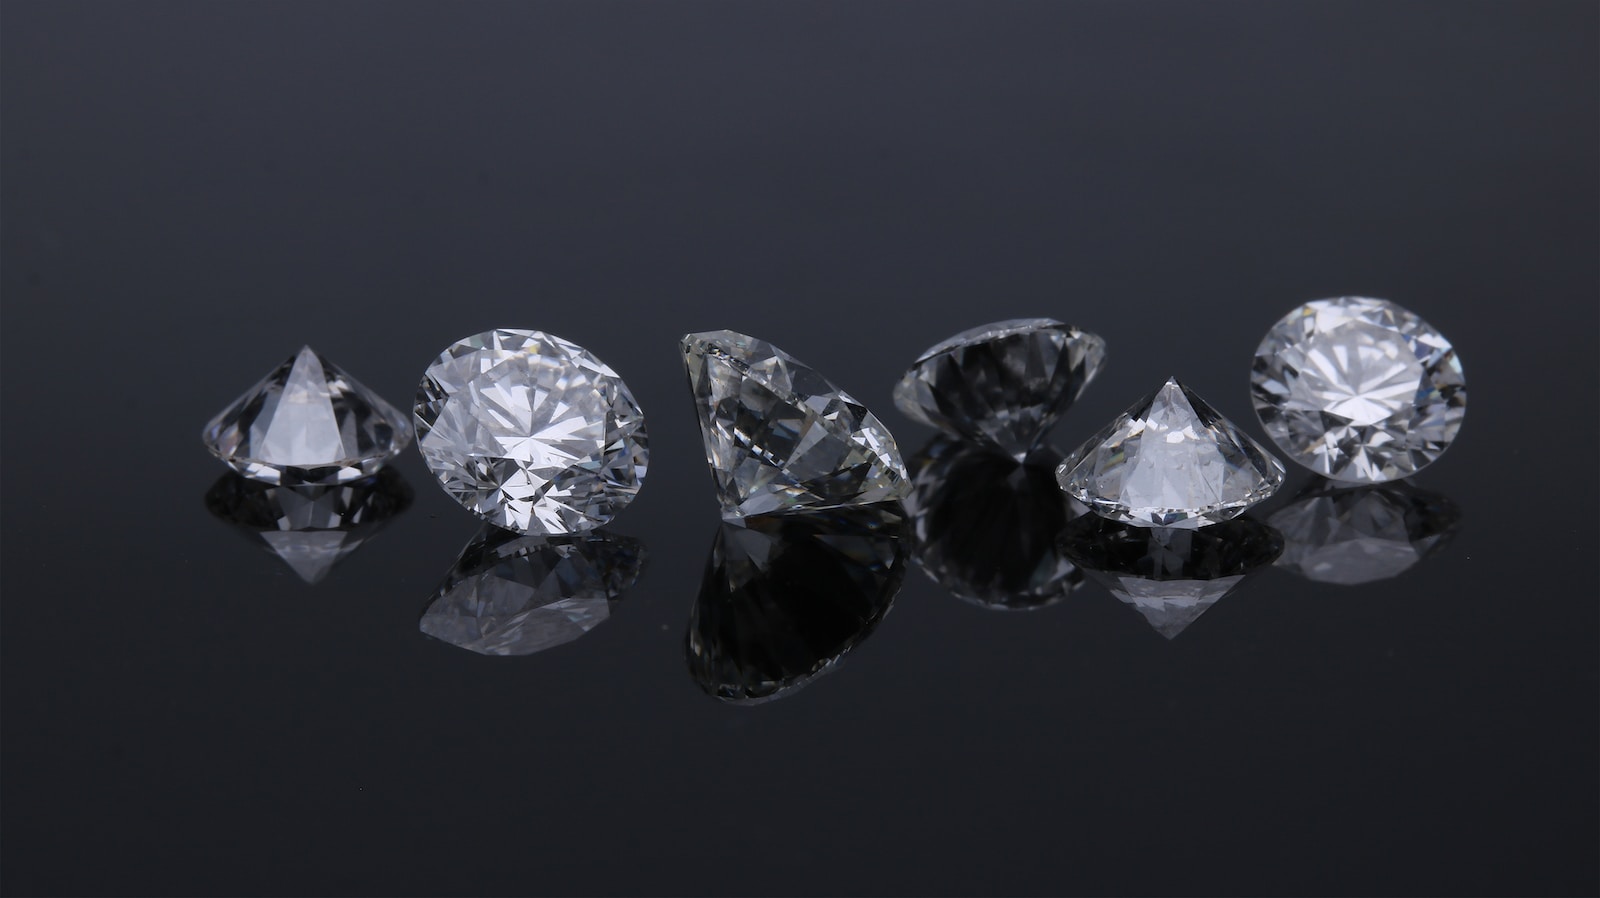 Will the export of Russian diamonds be banned?